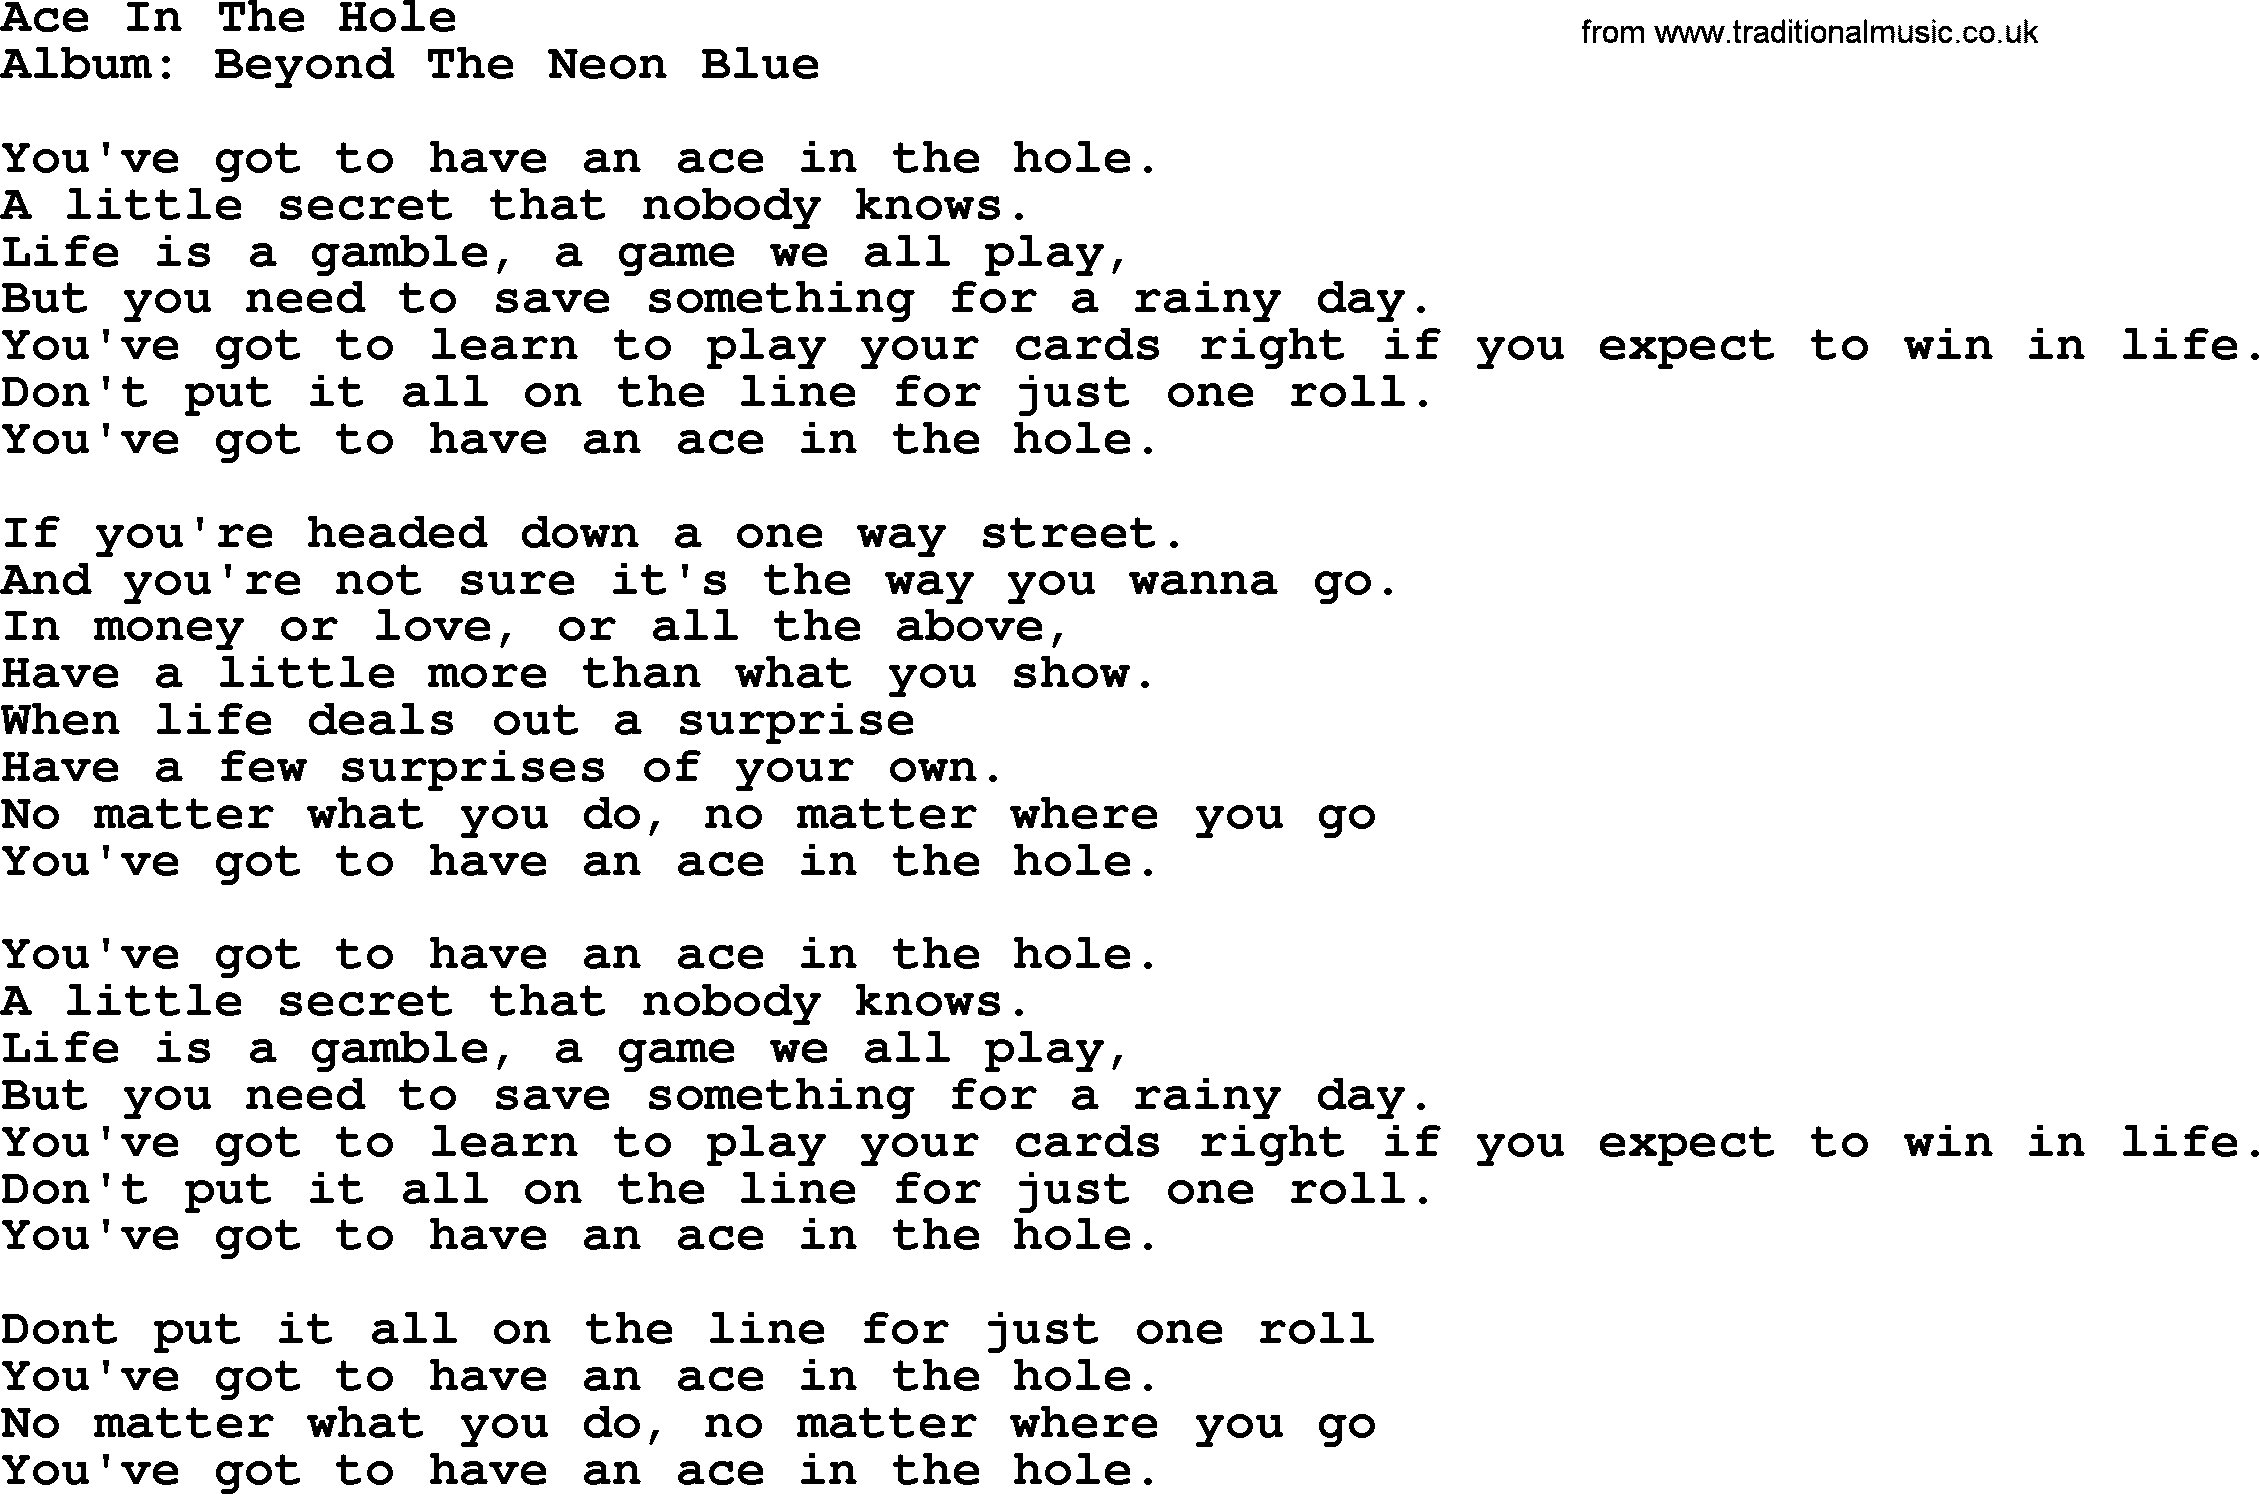 George Strait song: Ace In The Hole, lyrics